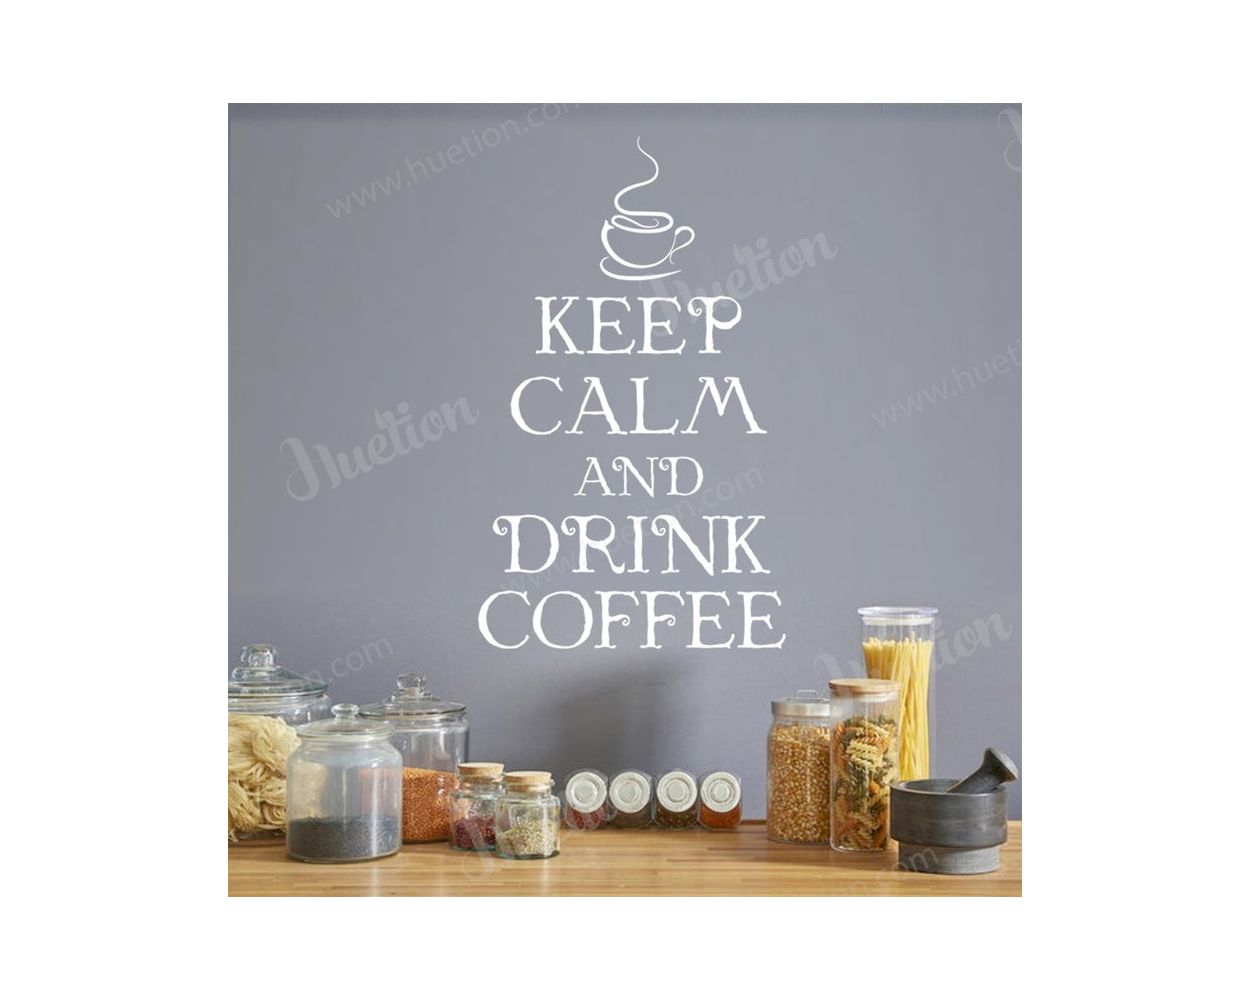 Keep Calm and Drink Coffee Stickers for Kitchen Wall Decor